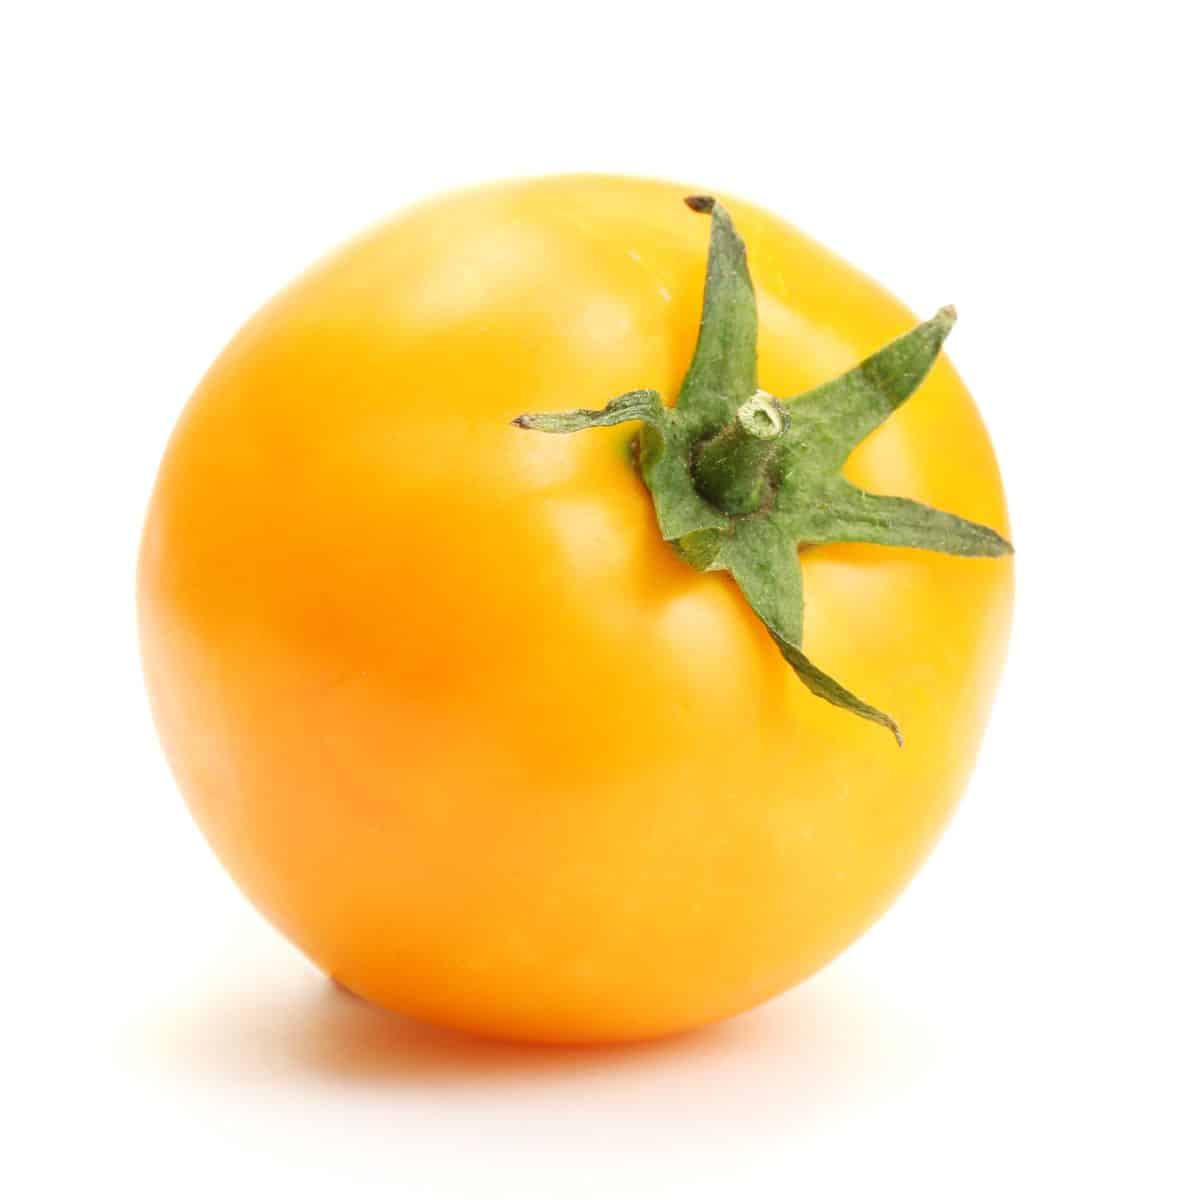 Jubilee tomato on a white background.